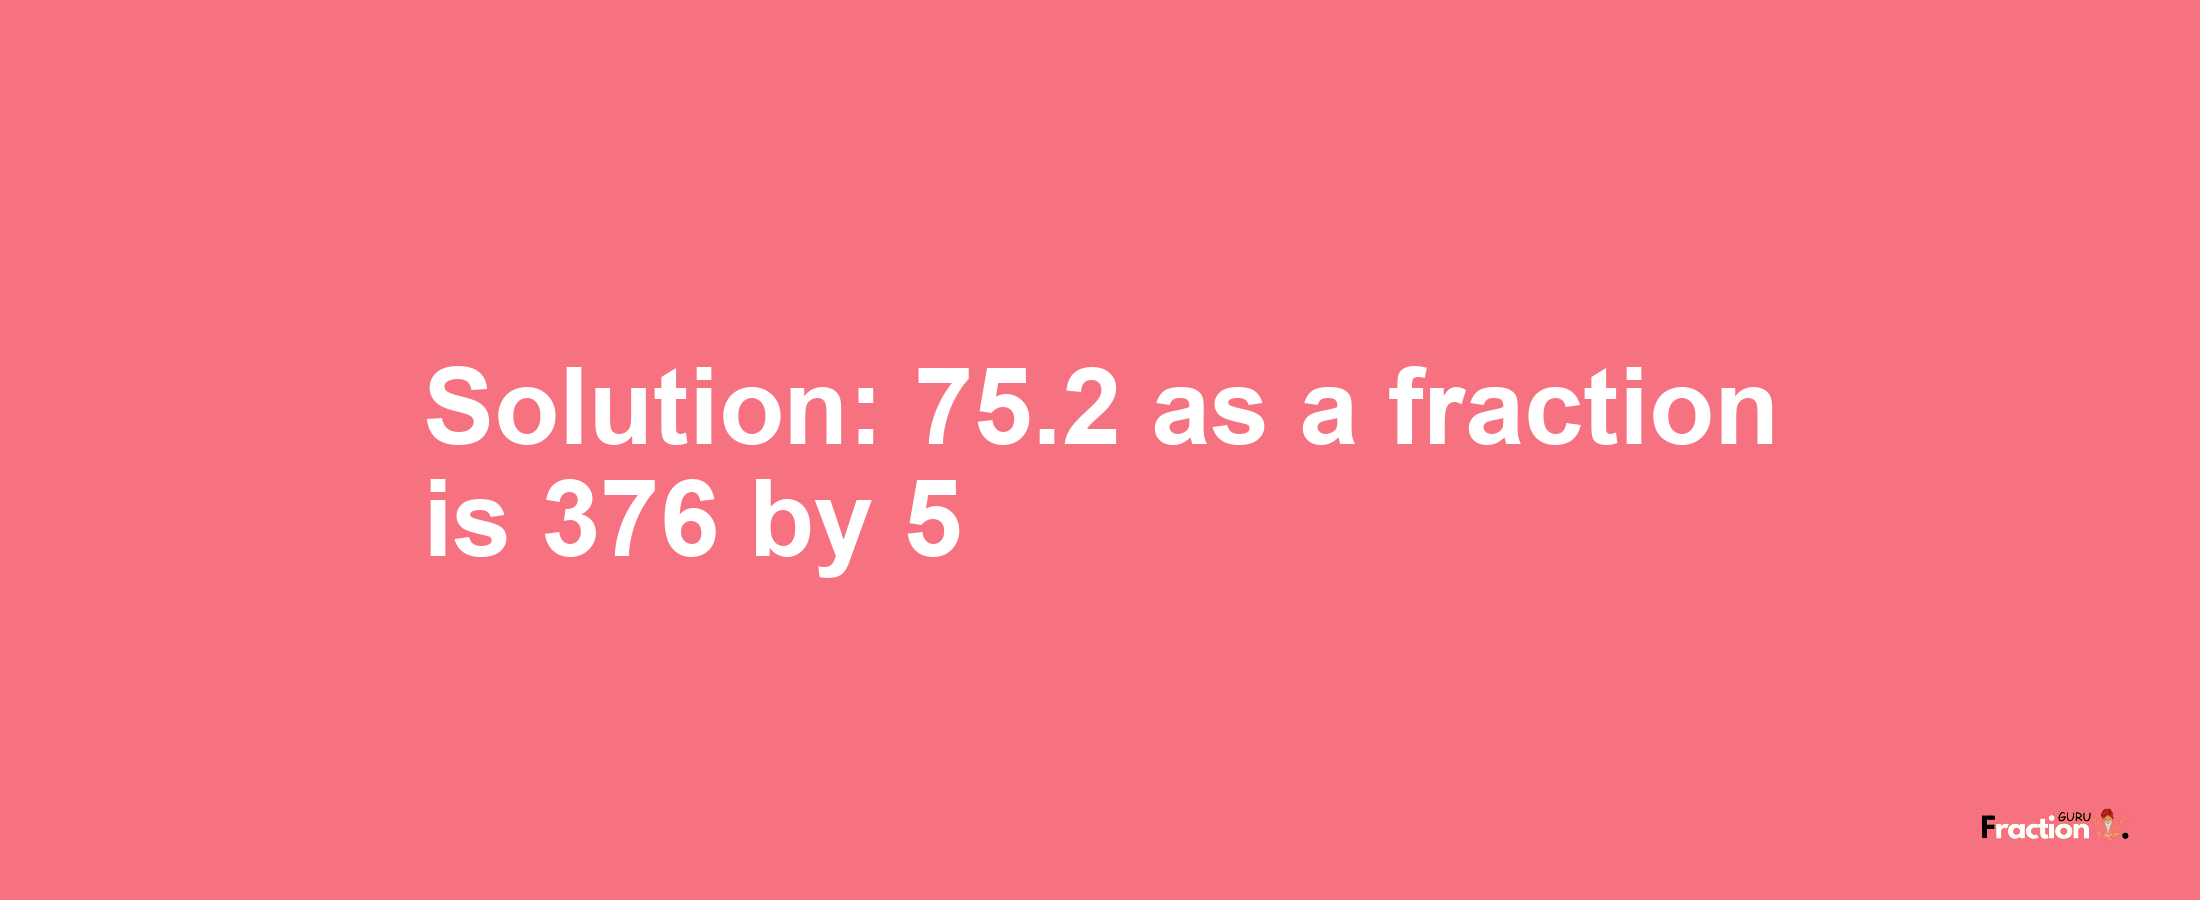 Solution:75.2 as a fraction is 376/5